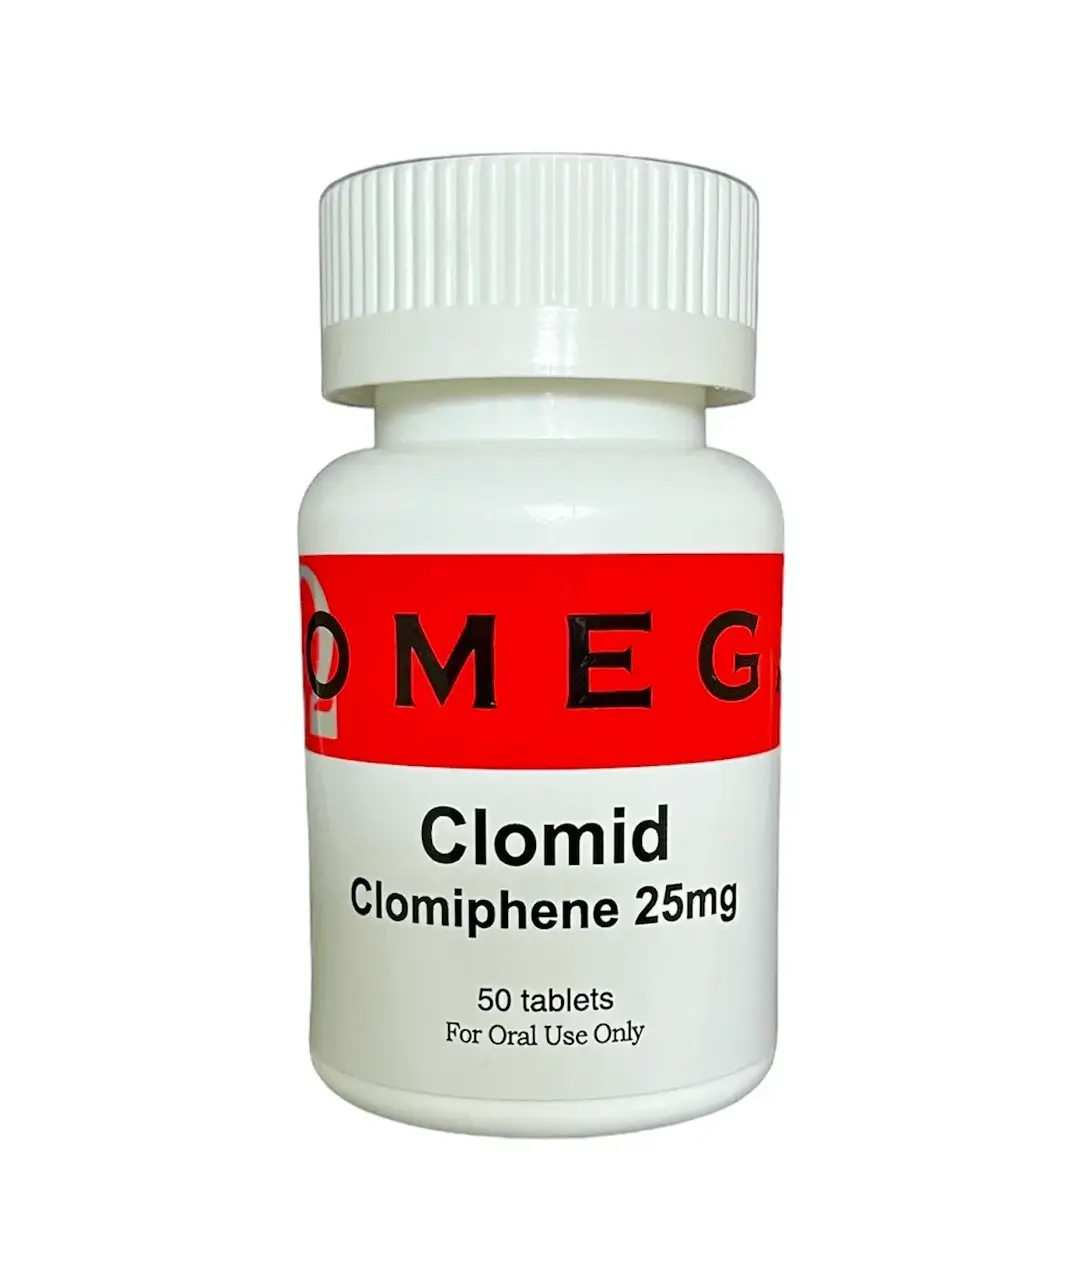 Clomid fertility and bodybuilding supplement bottle, Clomiphene Citrate for ovulation and performance enhancement